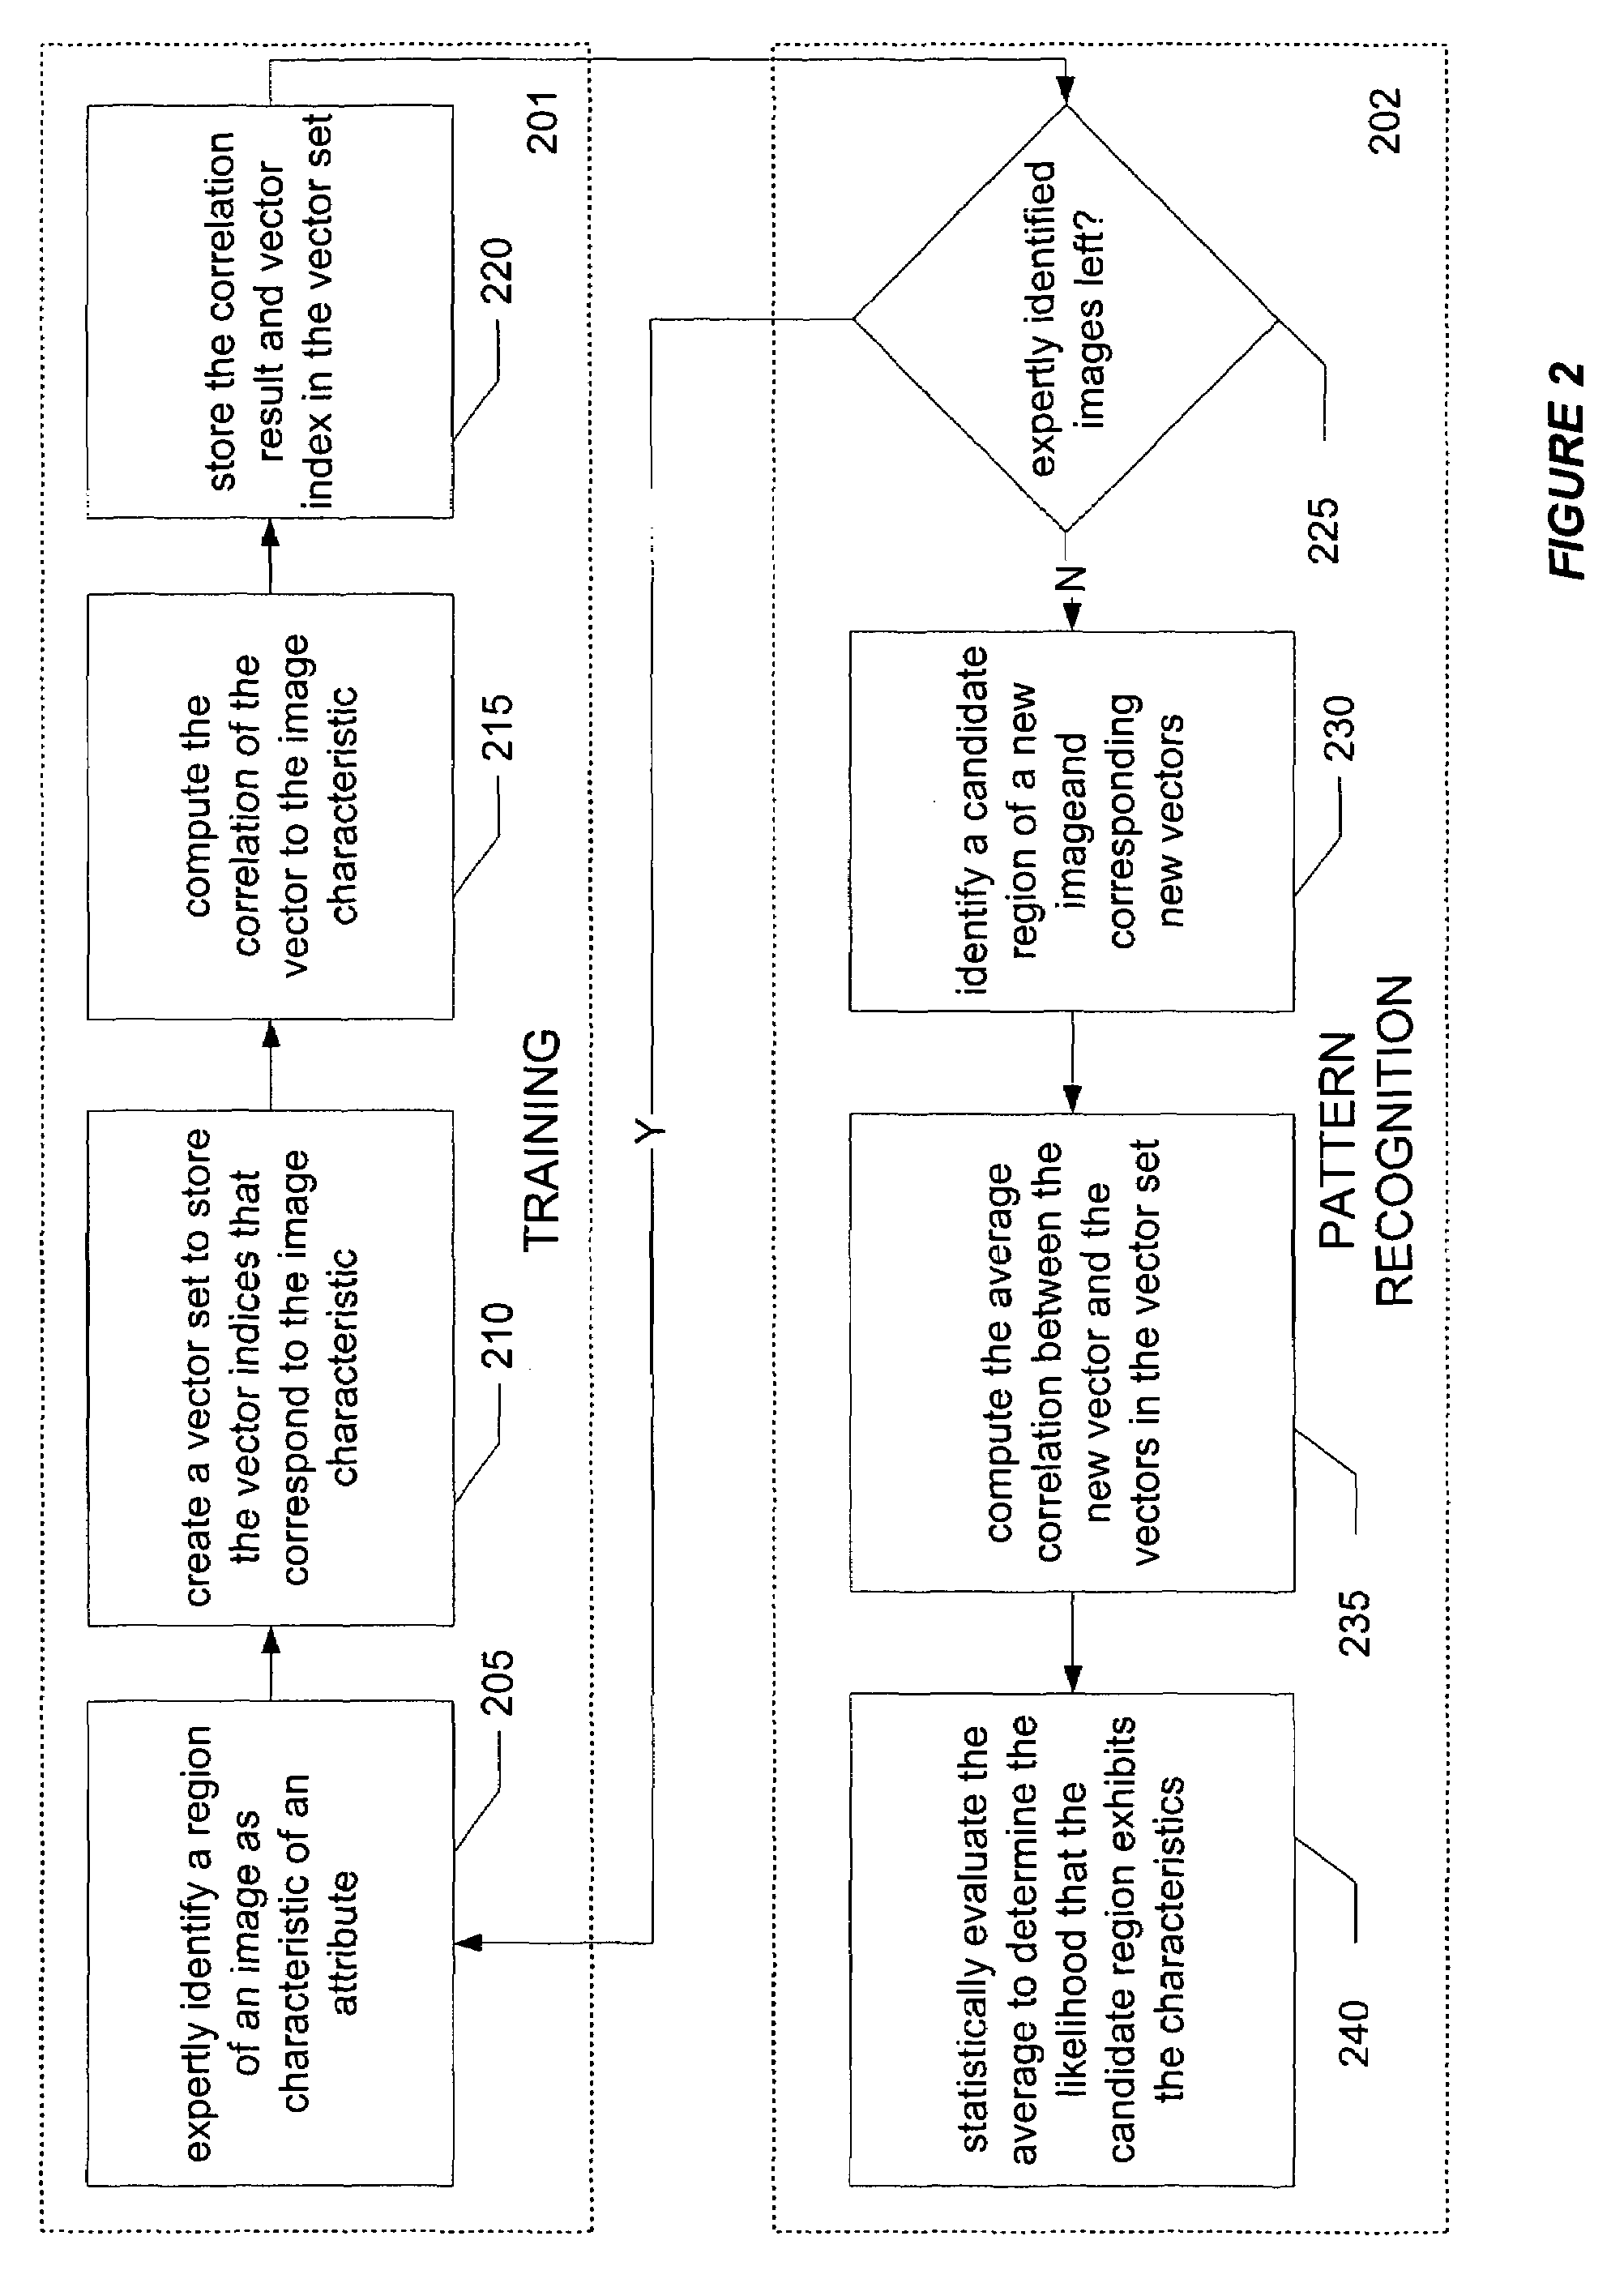 Systems and methods for image pattern recognition